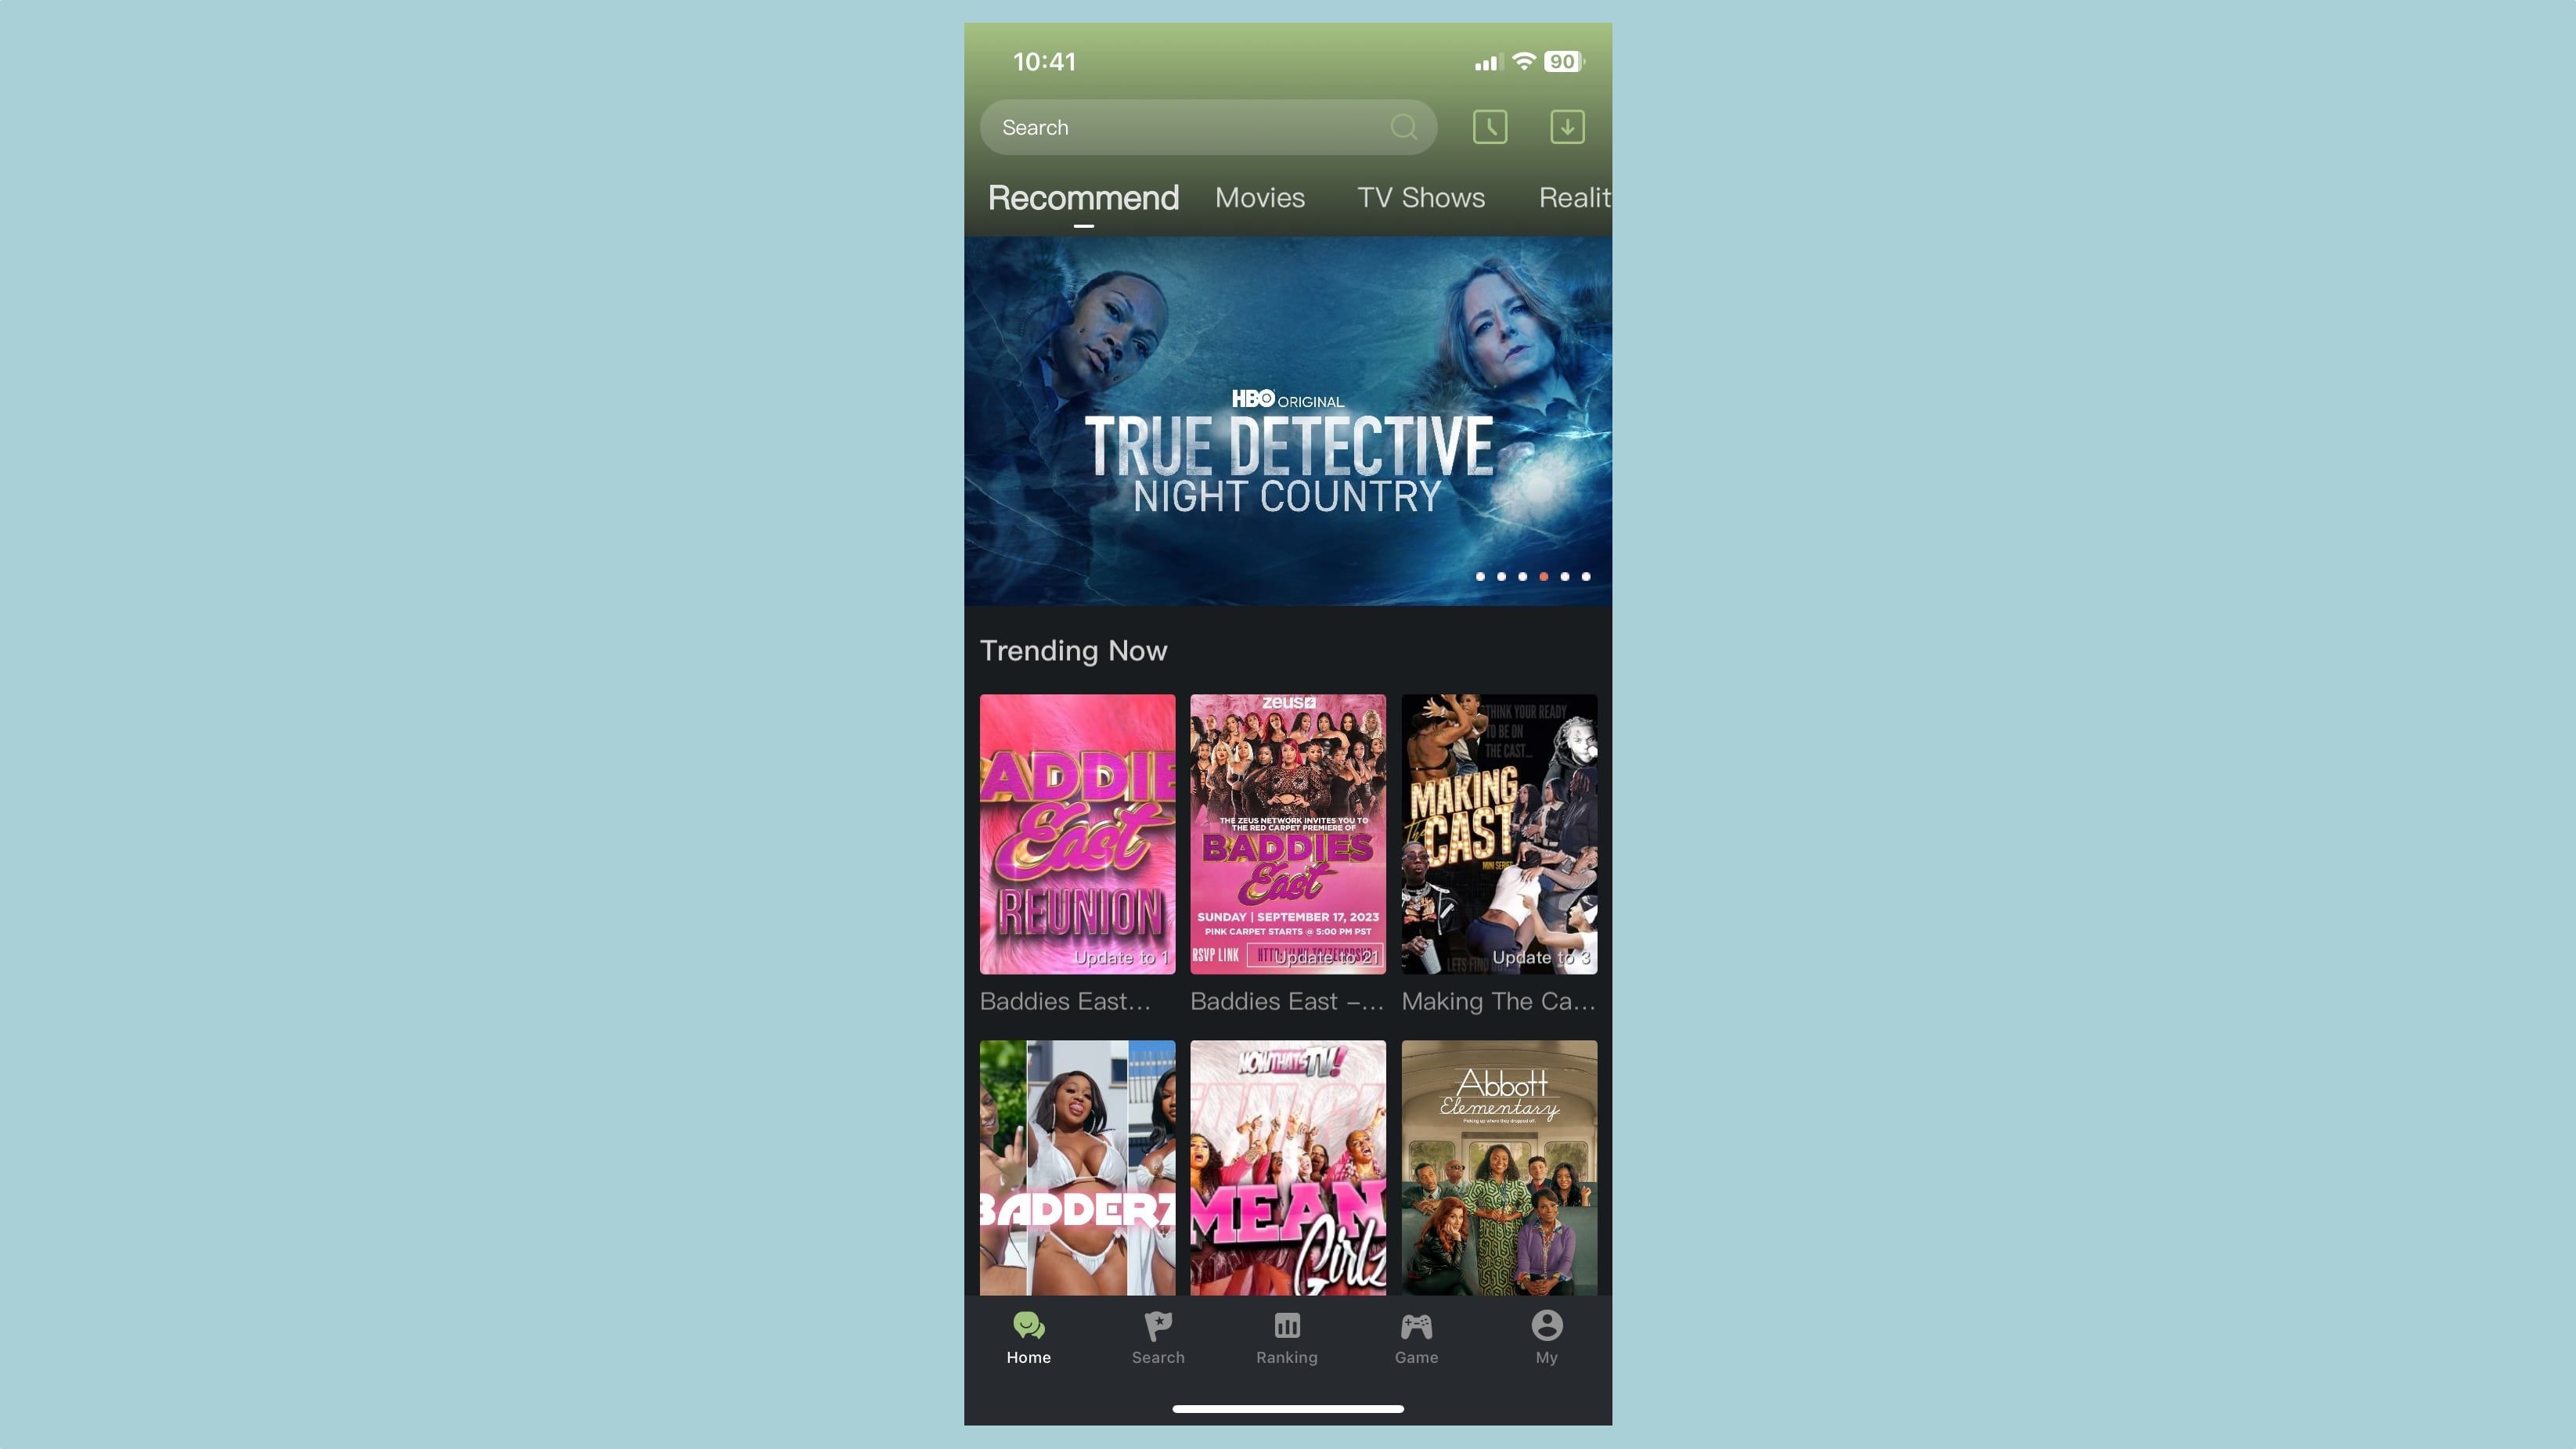 Illicit Movie Streaming App Successfully Enters App Store Pretending to Be Vision Testing Tool